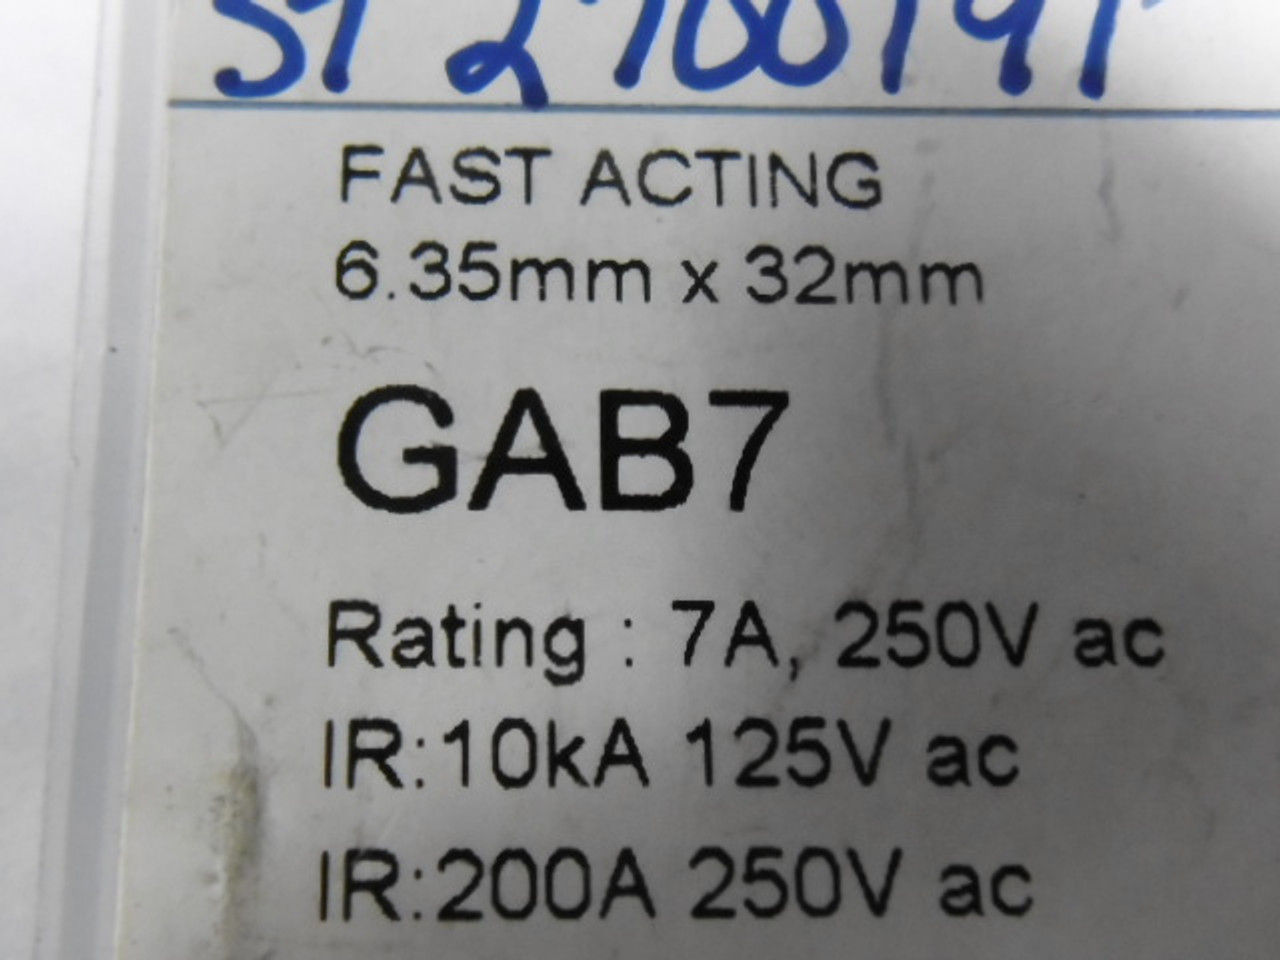 Mersen GAB7 Fast Acting Fuse 7A 250V 5-Pack ! NEW !